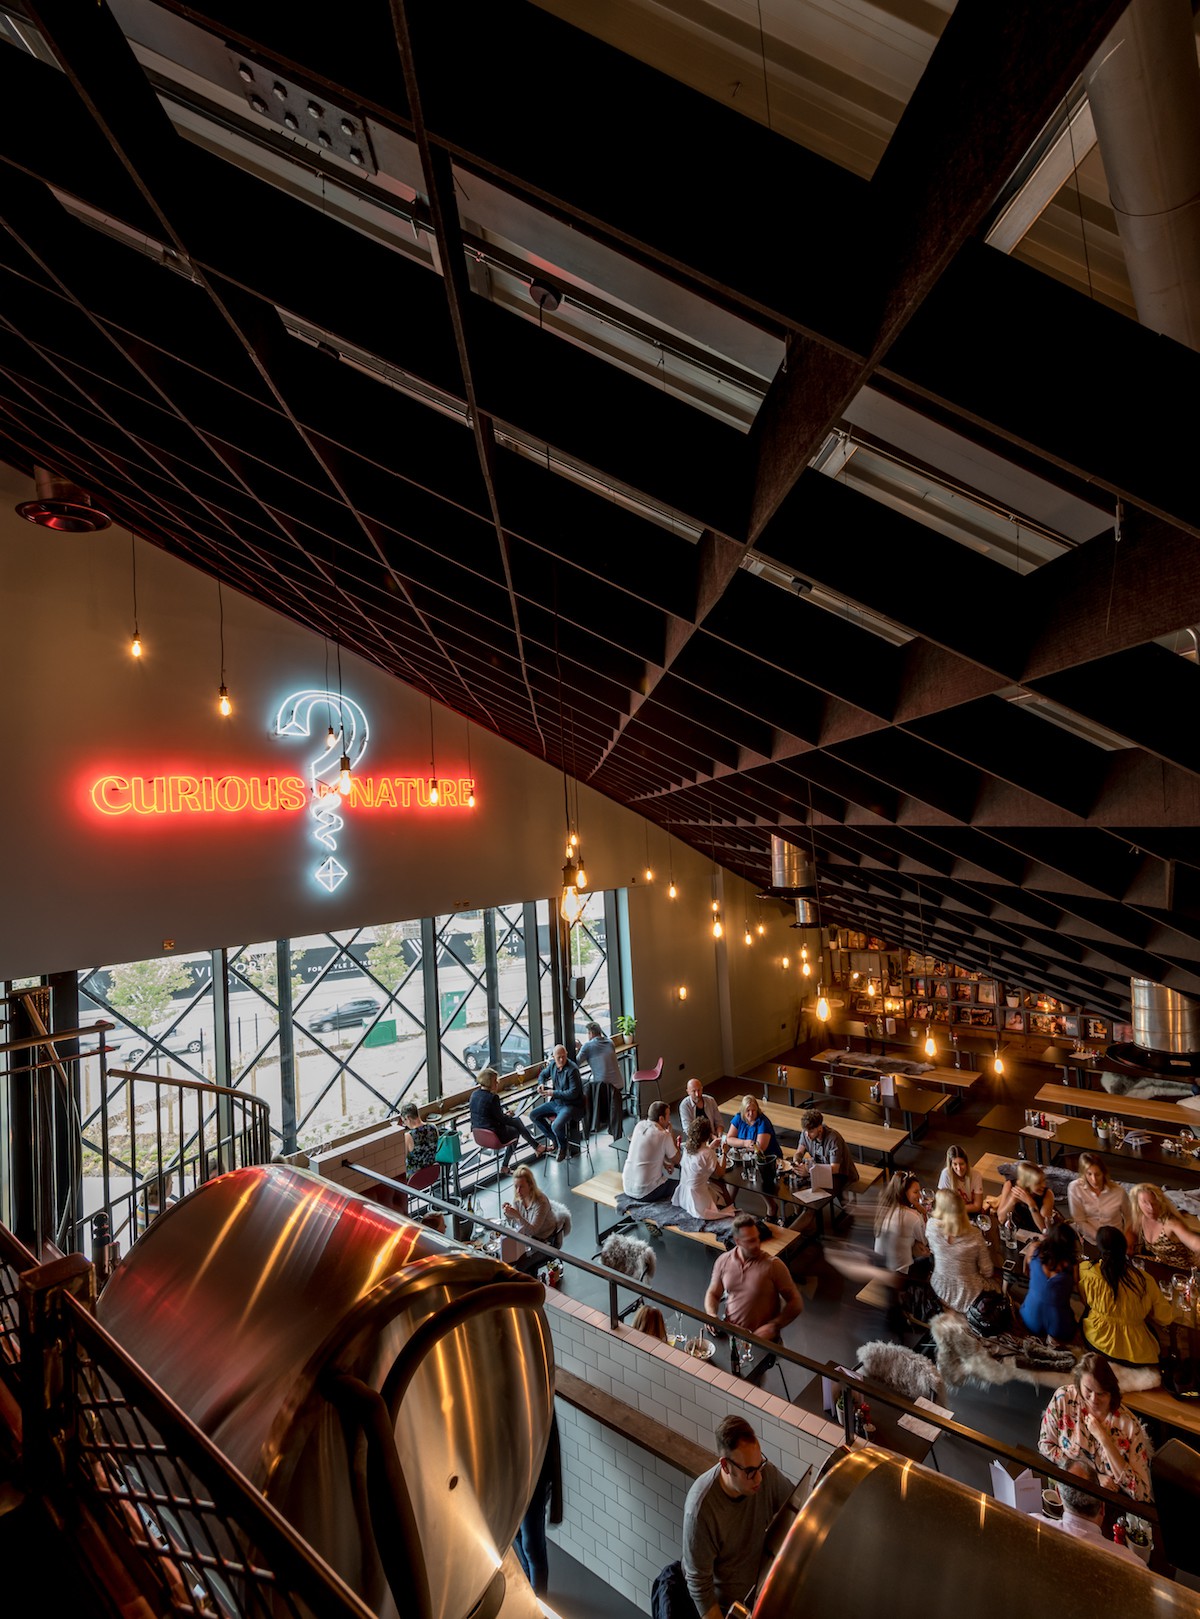 Inside the Curious Brewery restaurant in Ashford